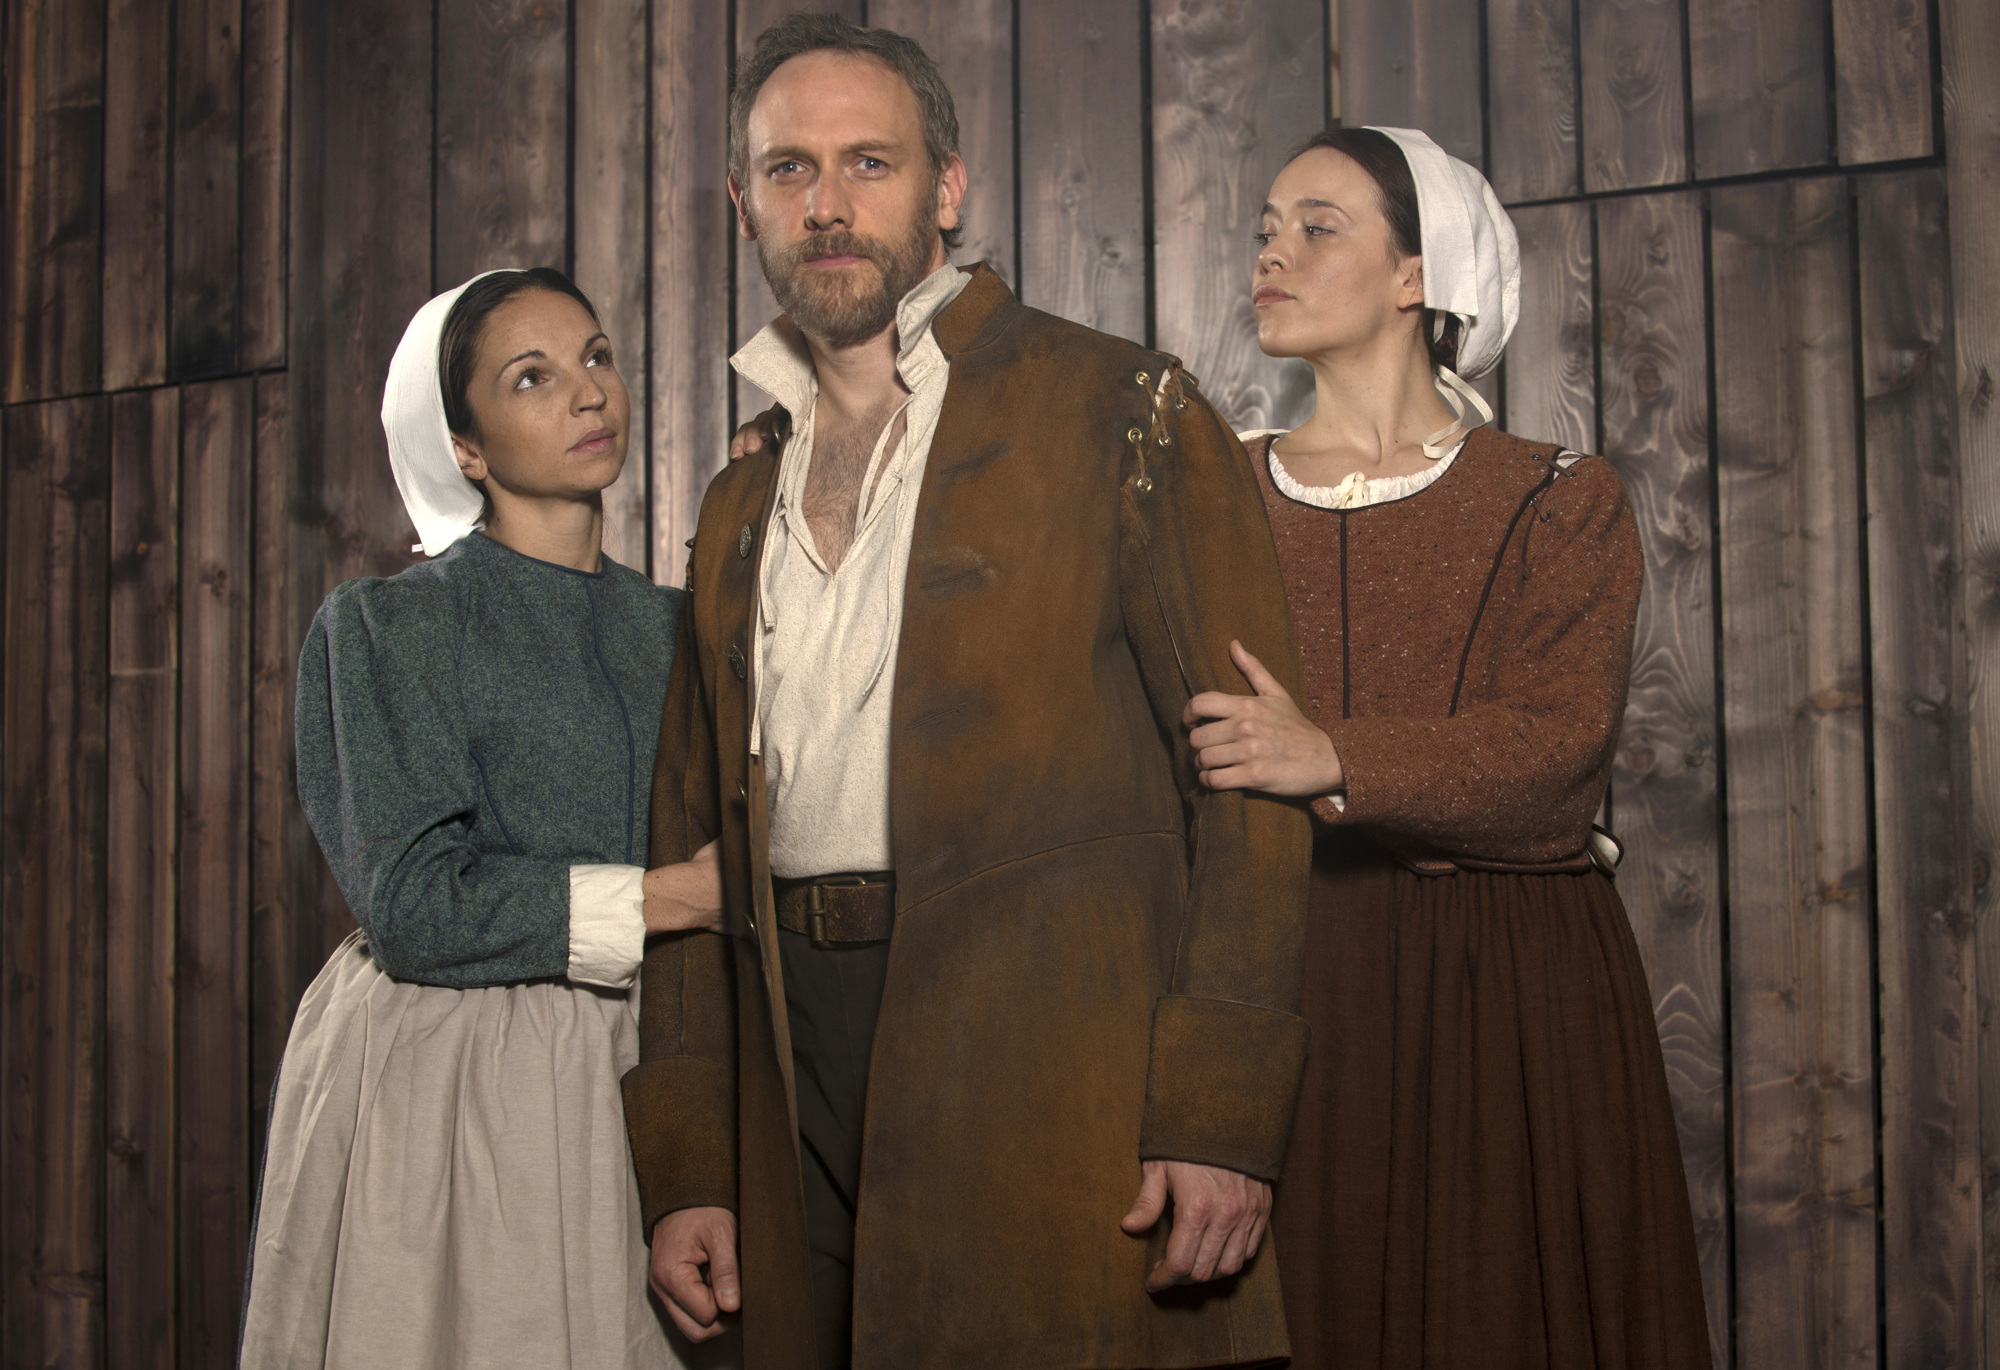 Laura Rook, Coburn Goss, and Amanda Fallon Smith star in Asolo Repertory Theatre’s production of “The Crucible.” Photo by John Revisky